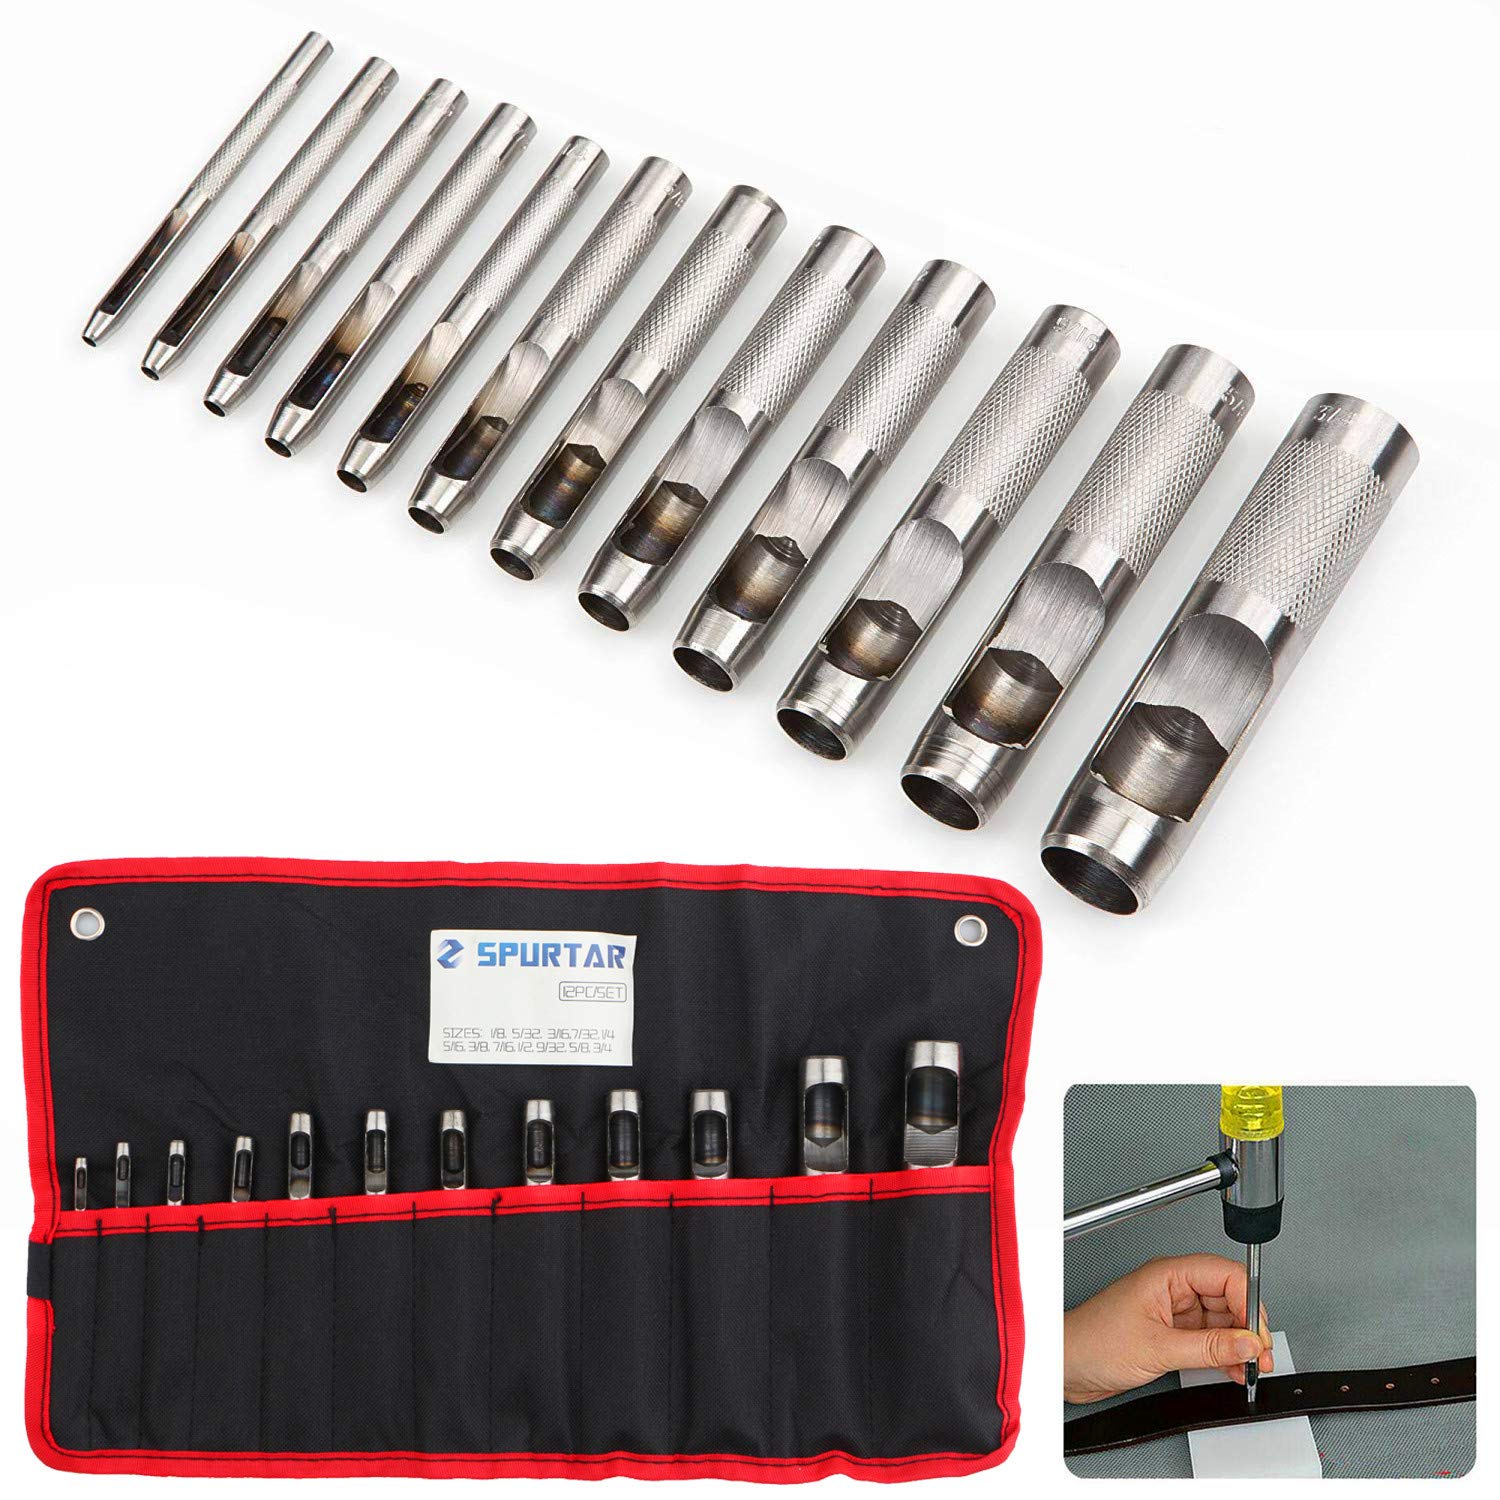 Spurtar 12 Pcs Steel Hollow Leather Punch Set 18-34(3-19Mm) Heavy Duty Round Hole Punch Set Leather Hole Tool For Watch Cloth Be